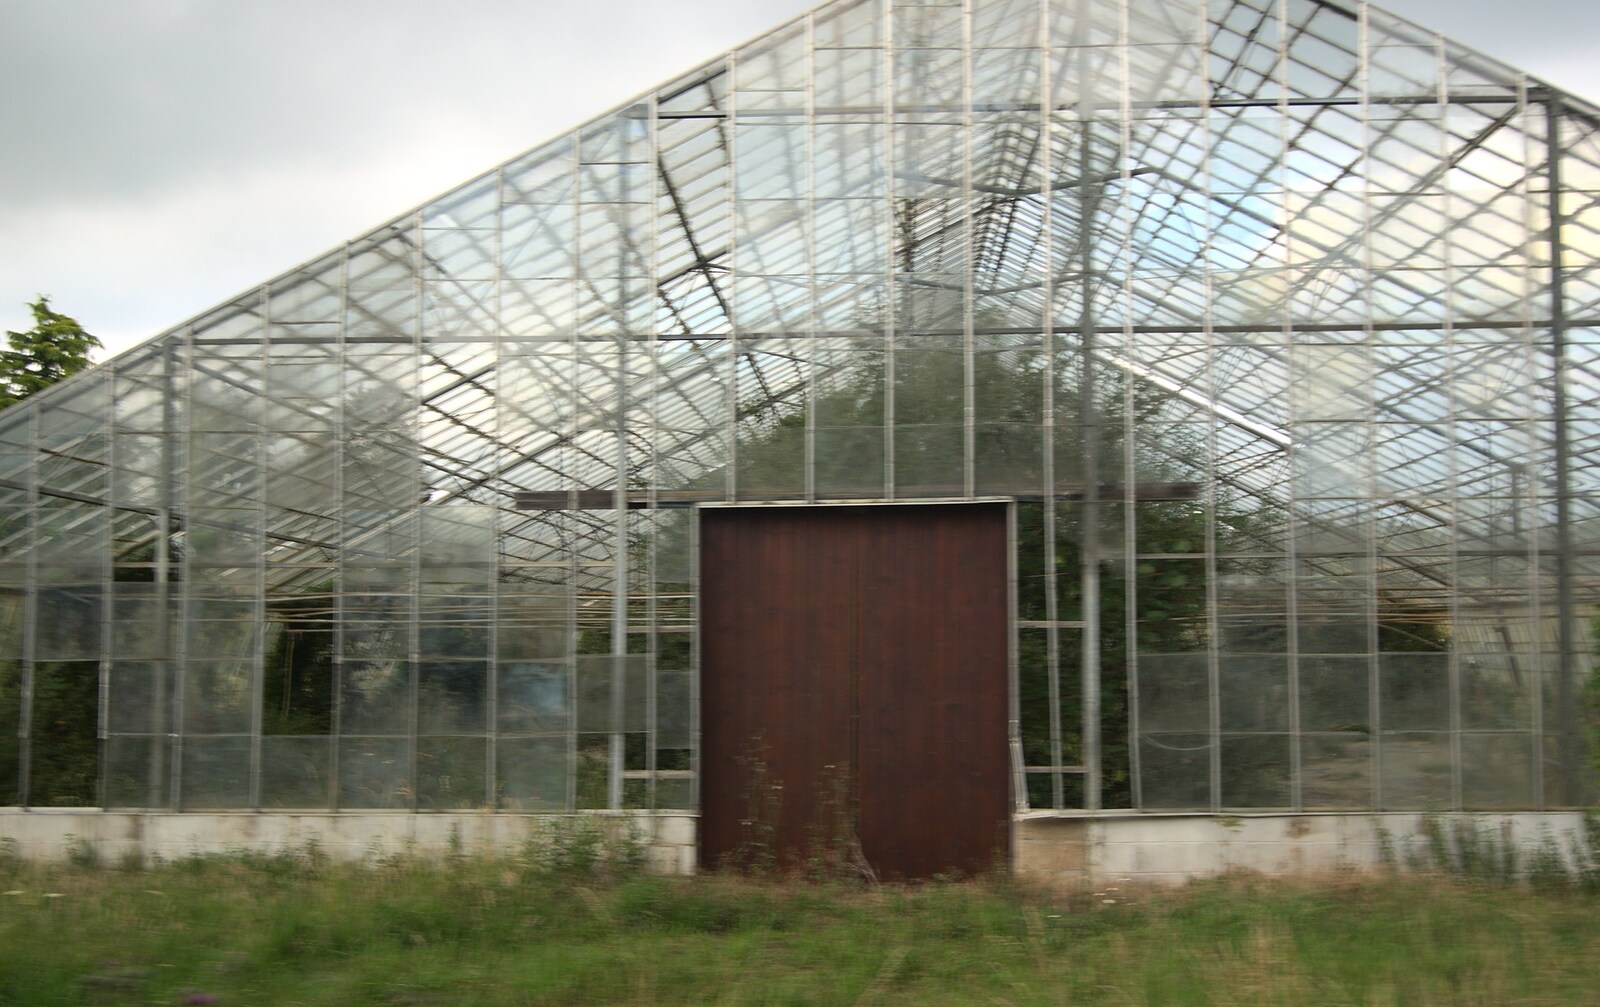 A huge derelict greenhouse from A Few Hours at the Bressingham Steam Museum, Bressingham, Norfolk - 2nd July 2011